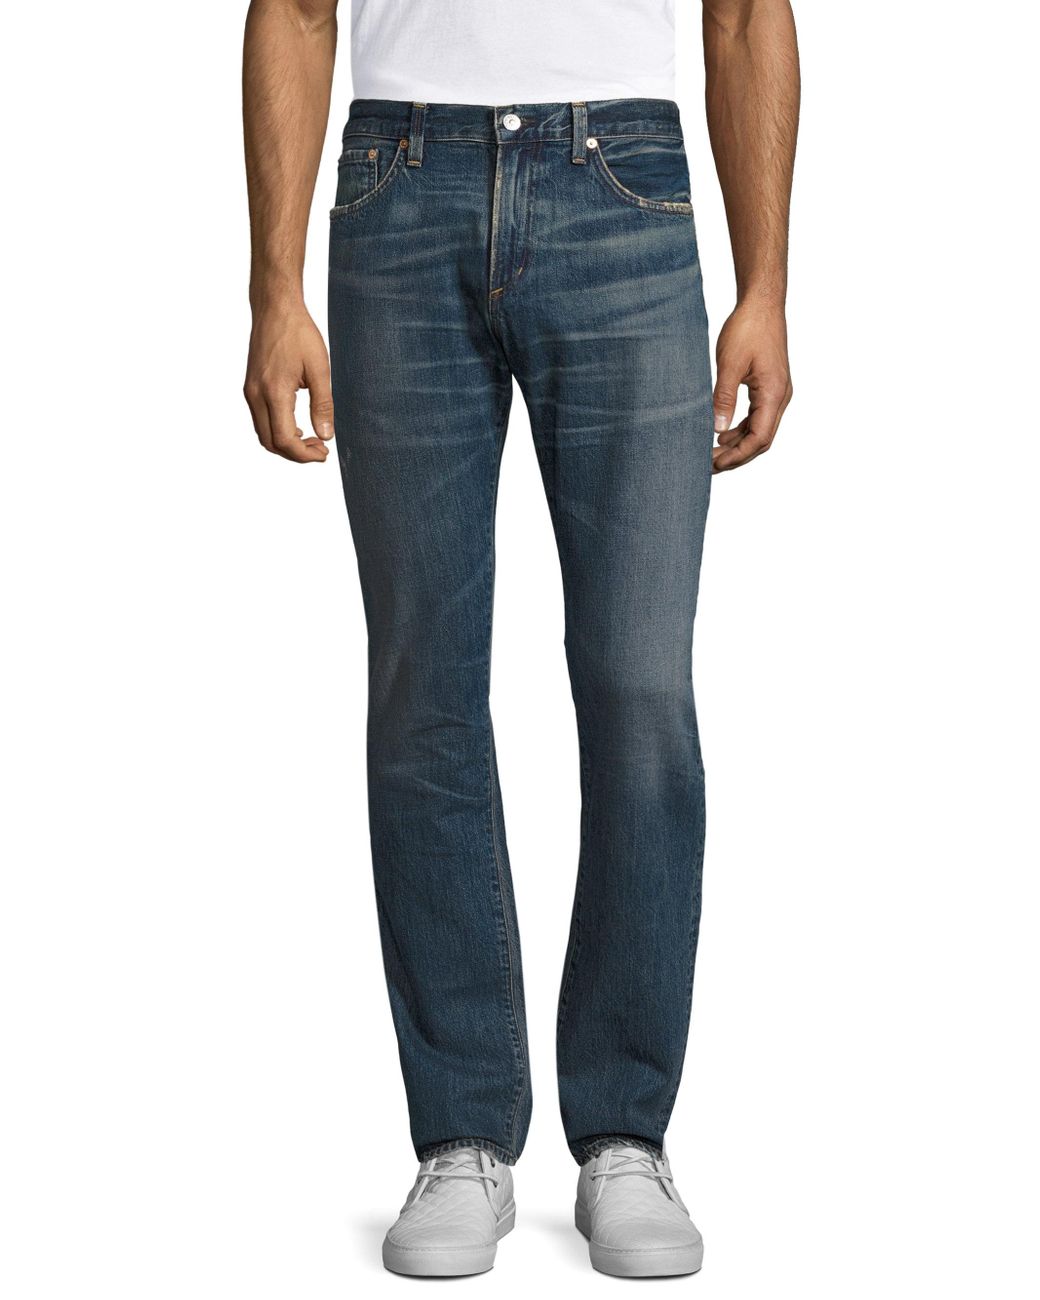 Lyst - Citizens Of Humanity Slim-fit Jeans in Blue for Men